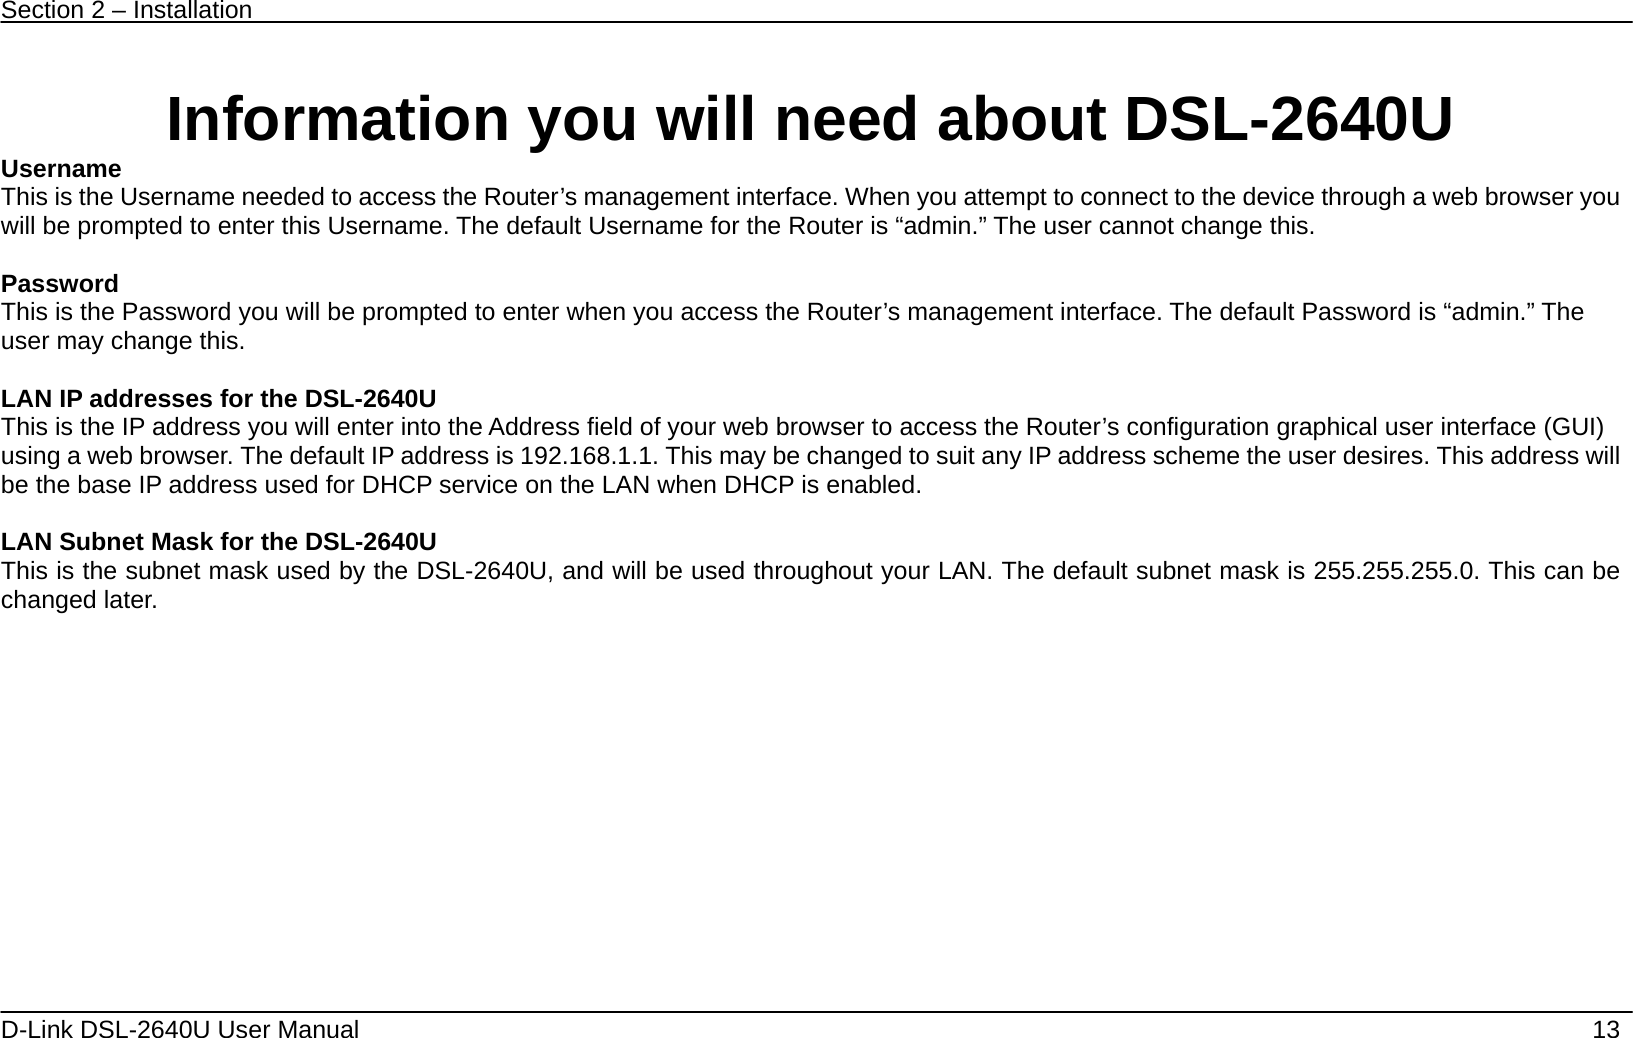 Section 2 – Installation   D-Link DSL-2640U User Manual    13  Information you will need about DSL-2640U Username  This is the Username needed to access the Router’s management interface. When you attempt to connect to the device through a web browser you will be prompted to enter this Username. The default Username for the Router is “admin.” The user cannot change this.  Password This is the Password you will be prompted to enter when you access the Router’s management interface. The default Password is “admin.” The user may change this.  LAN IP addresses for the DSL-2640U This is the IP address you will enter into the Address field of your web browser to access the Router’s configuration graphical user interface (GUI) using a web browser. The default IP address is 192.168.1.1. This may be changed to suit any IP address scheme the user desires. This address will be the base IP address used for DHCP service on the LAN when DHCP is enabled.  LAN Subnet Mask for the DSL-2640U This is the subnet mask used by the DSL-2640U, and will be used throughout your LAN. The default subnet mask is 255.255.255.0. This can be changed later.   